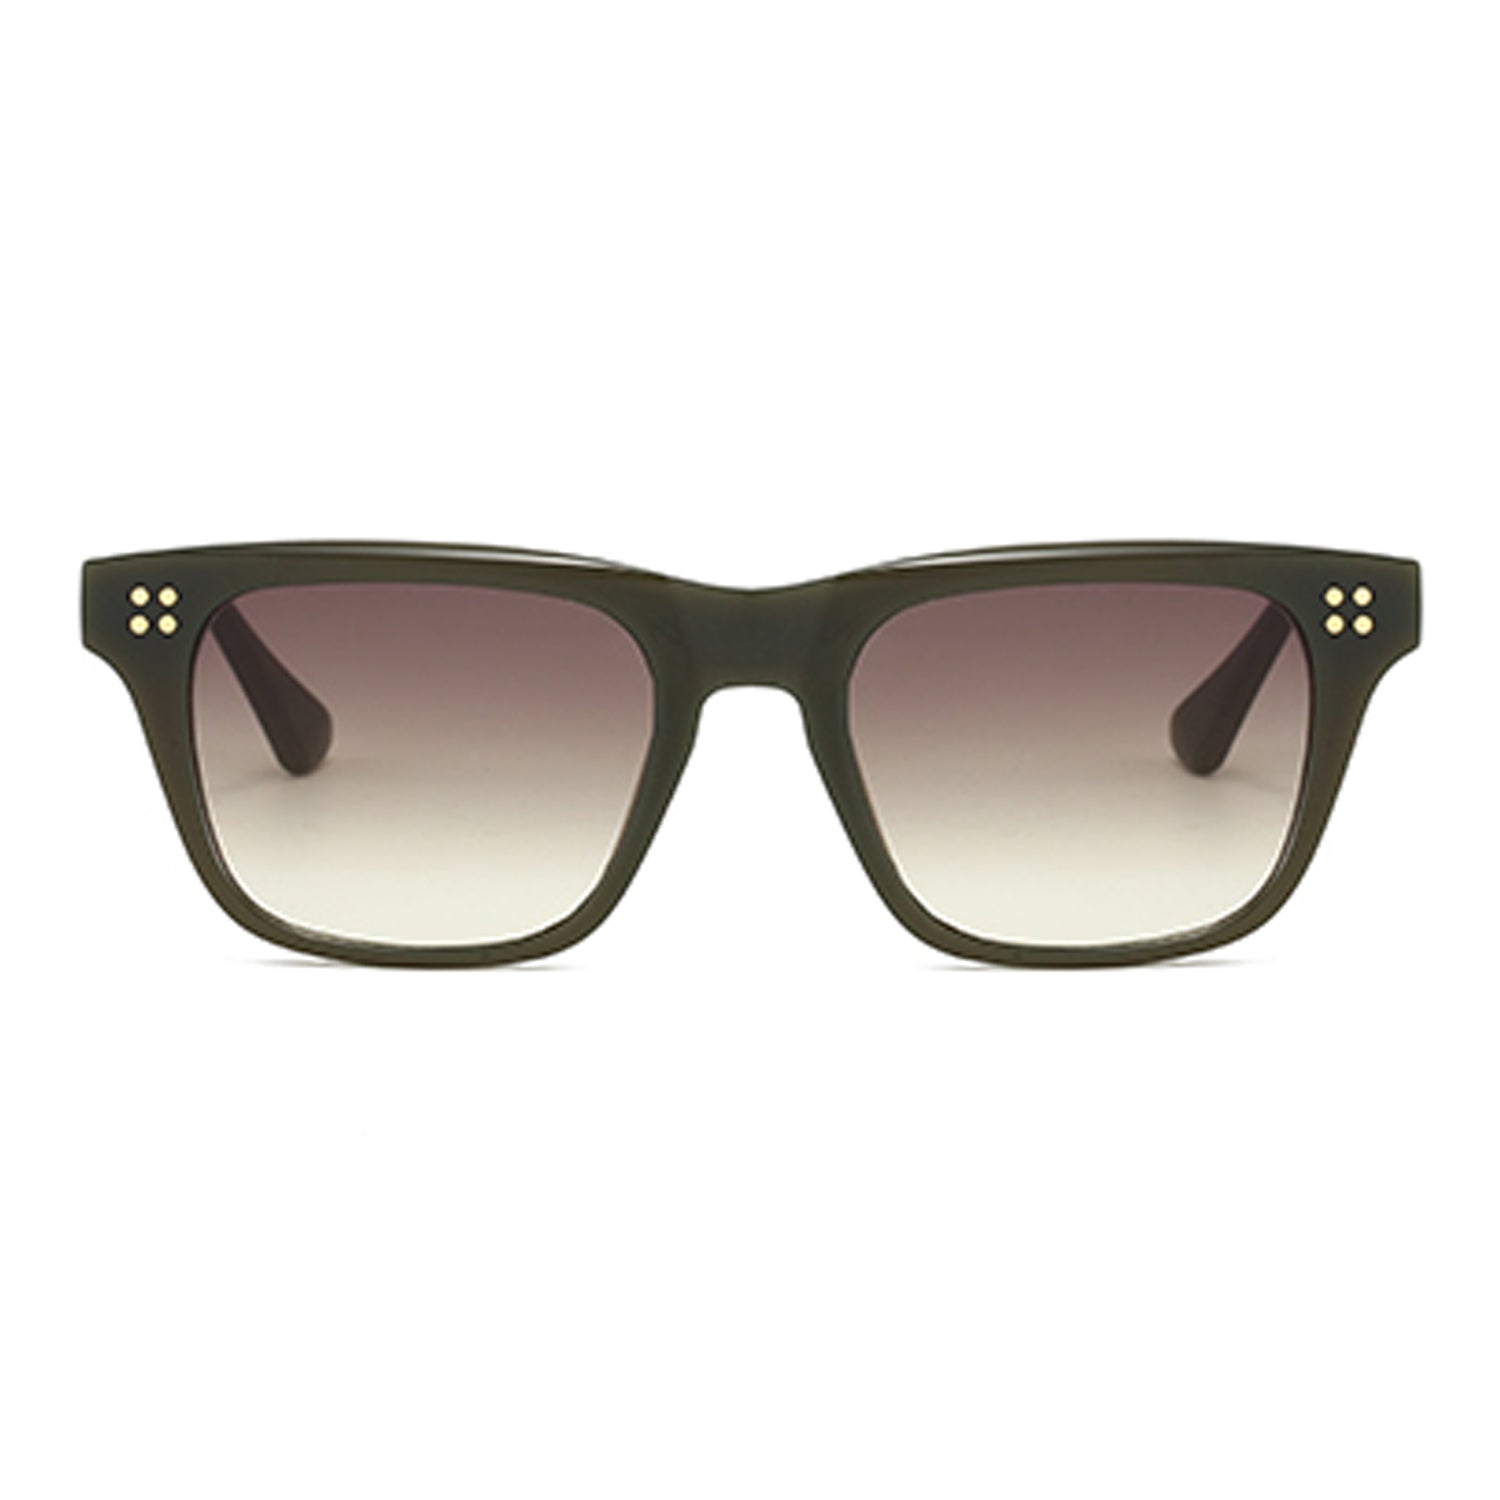 VP1064 - SQUARE CLASSIC HORN RIMMED TINTED FLAT TOP SUNGLASSES